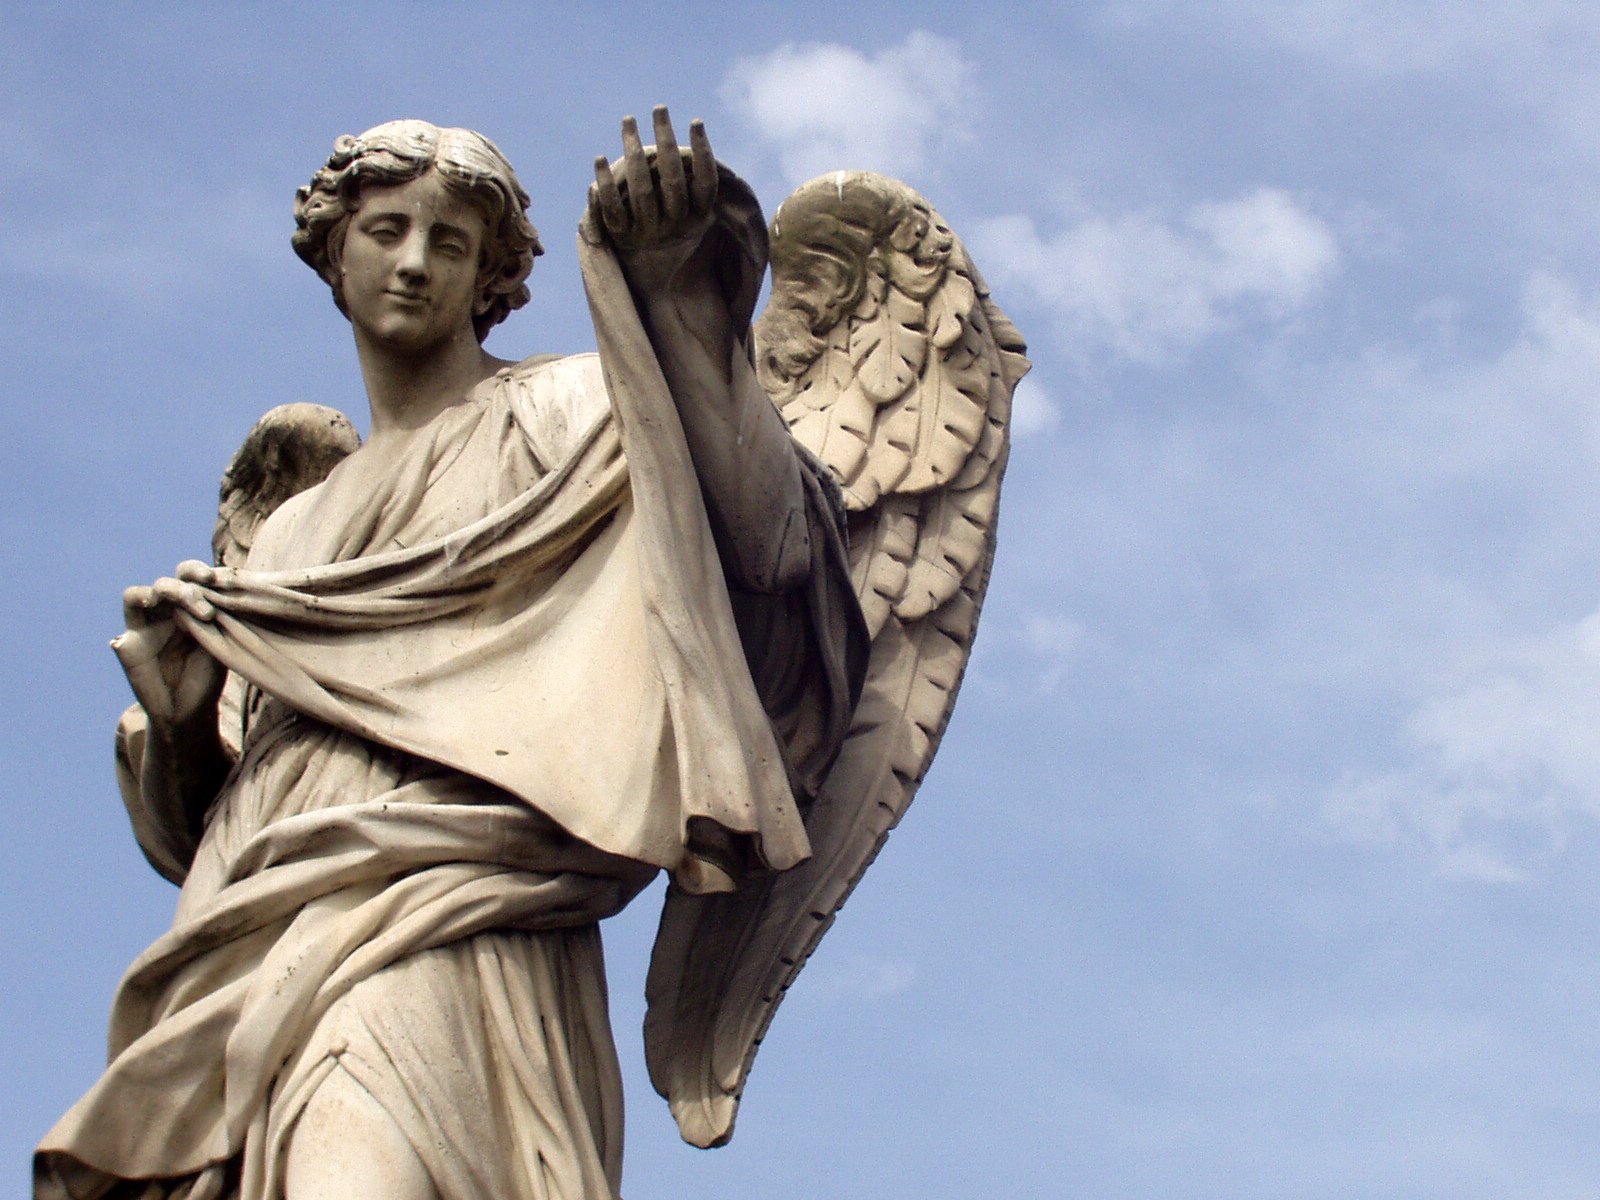 statue of an angel with wings against a blue sky